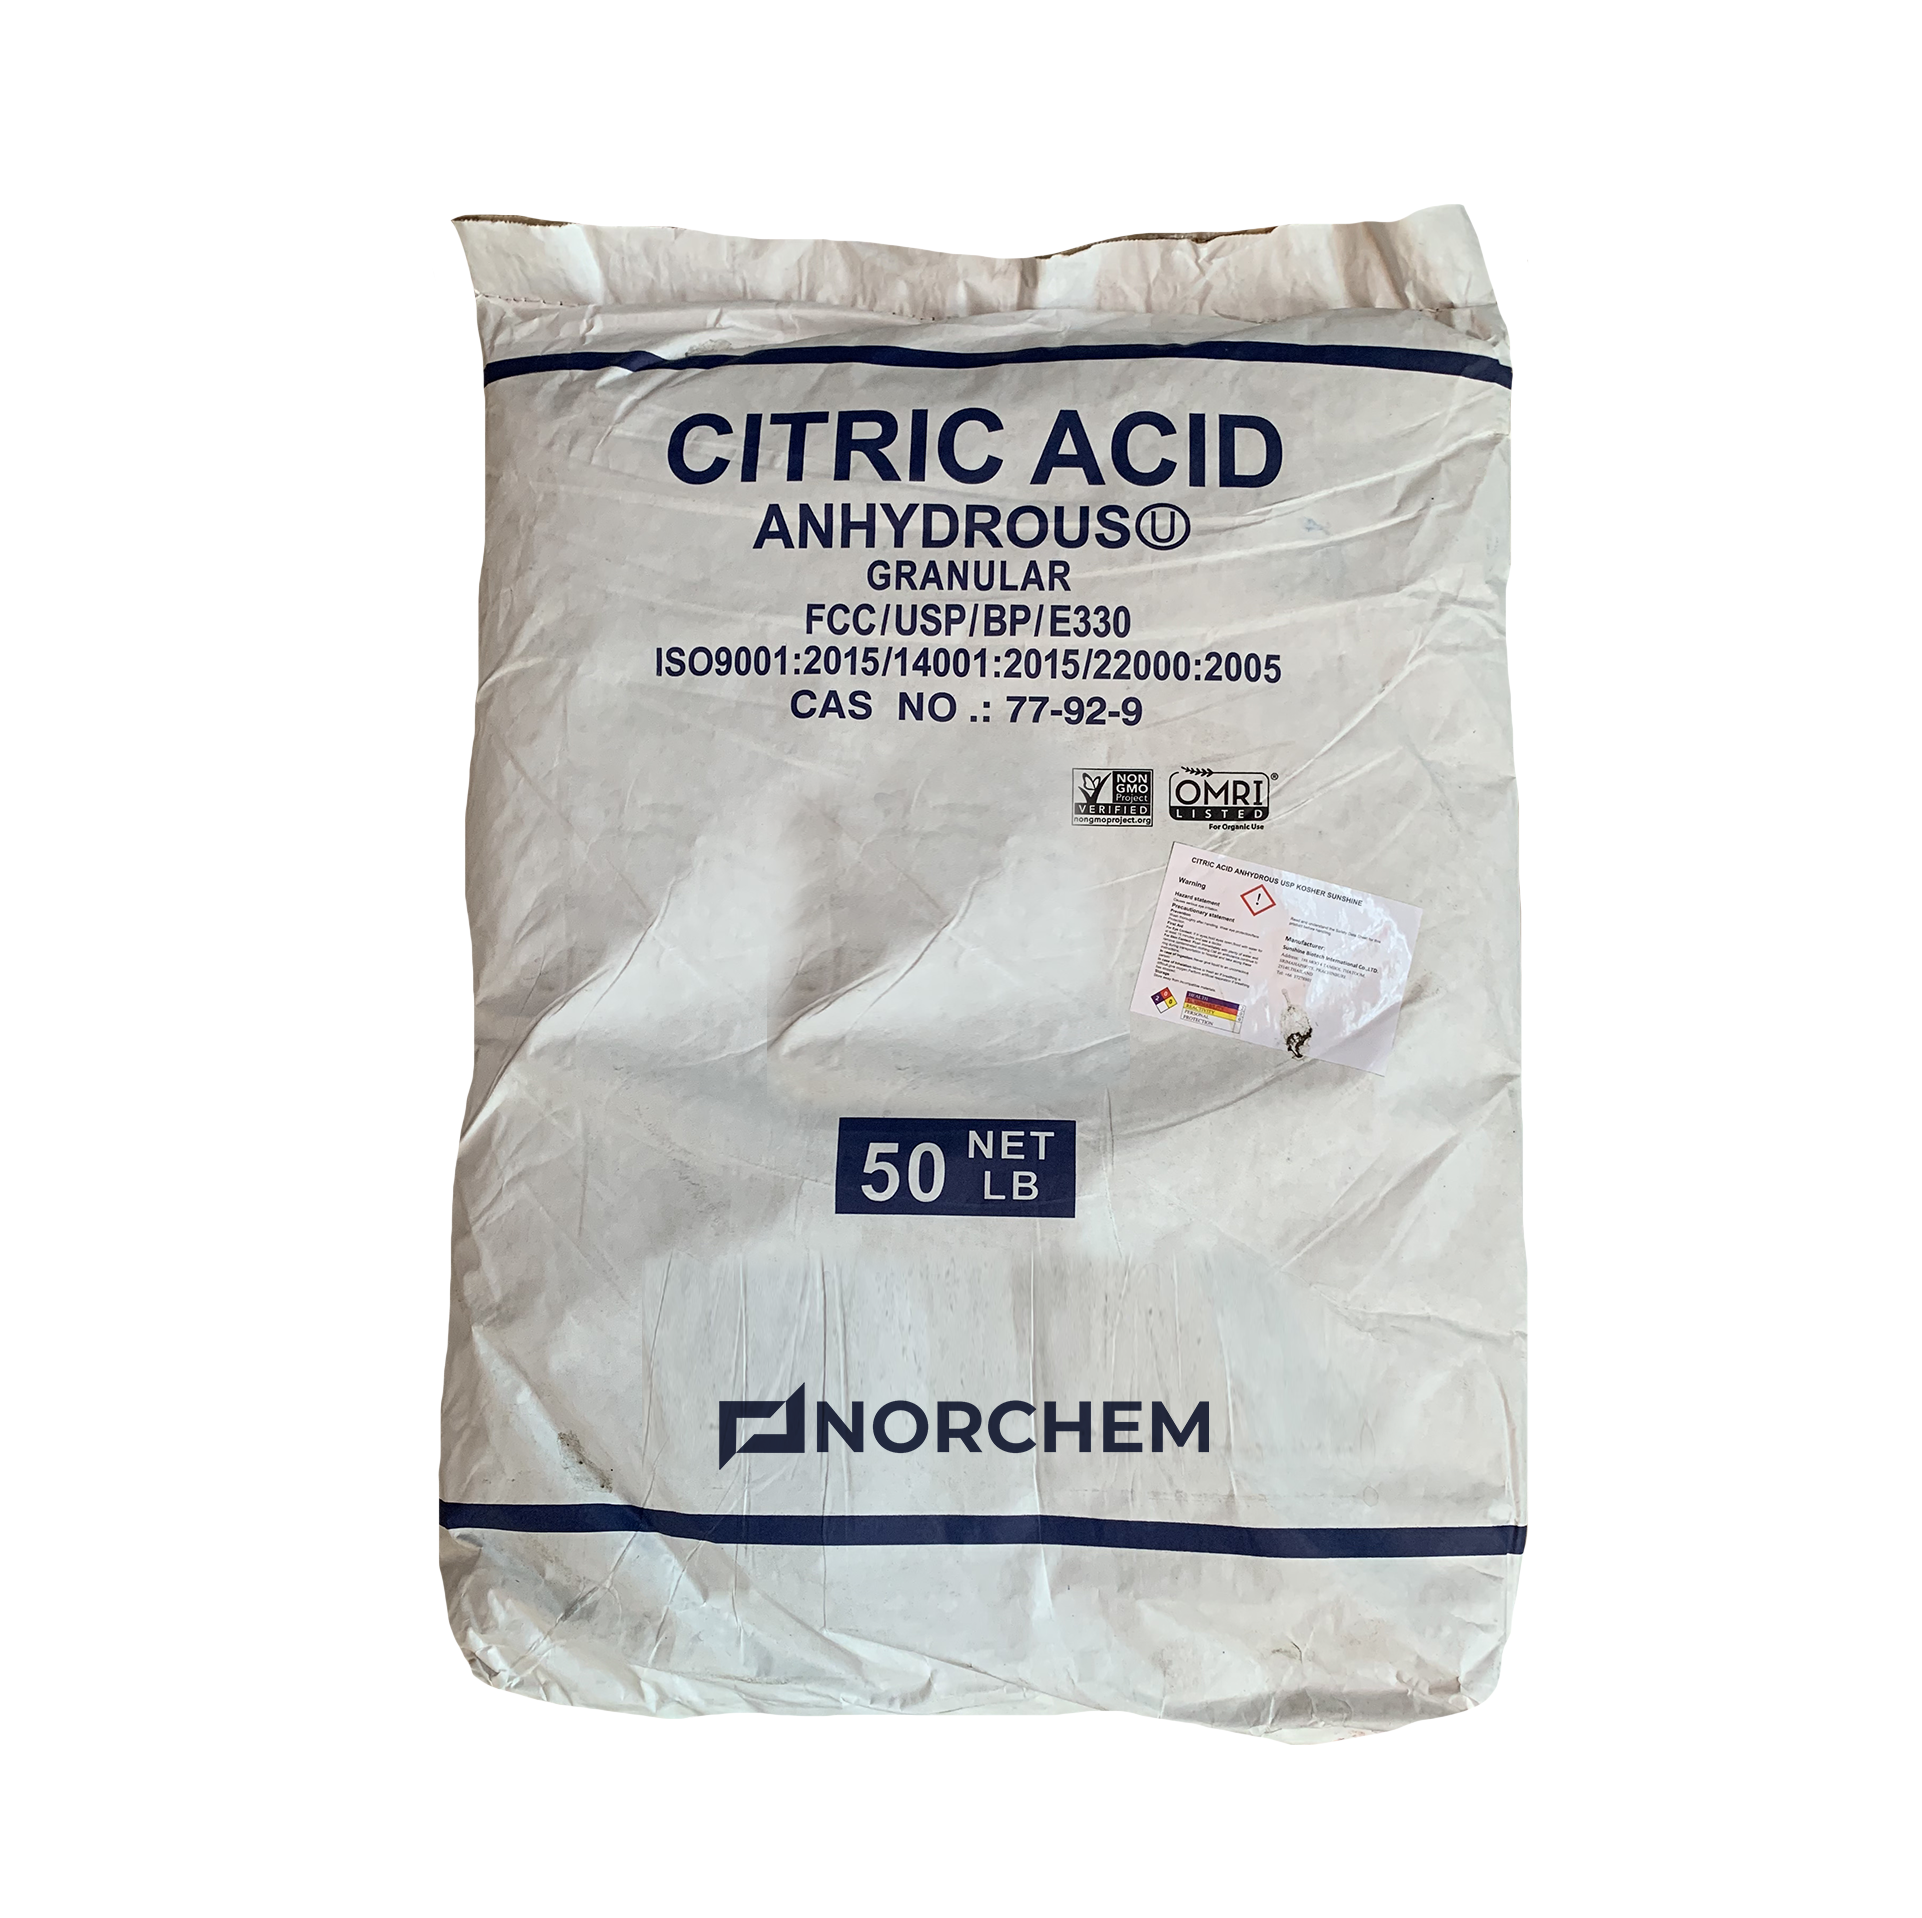 Cleaning with Citric Acid? Here's What You Need to Know. - CORECHEM Inc.